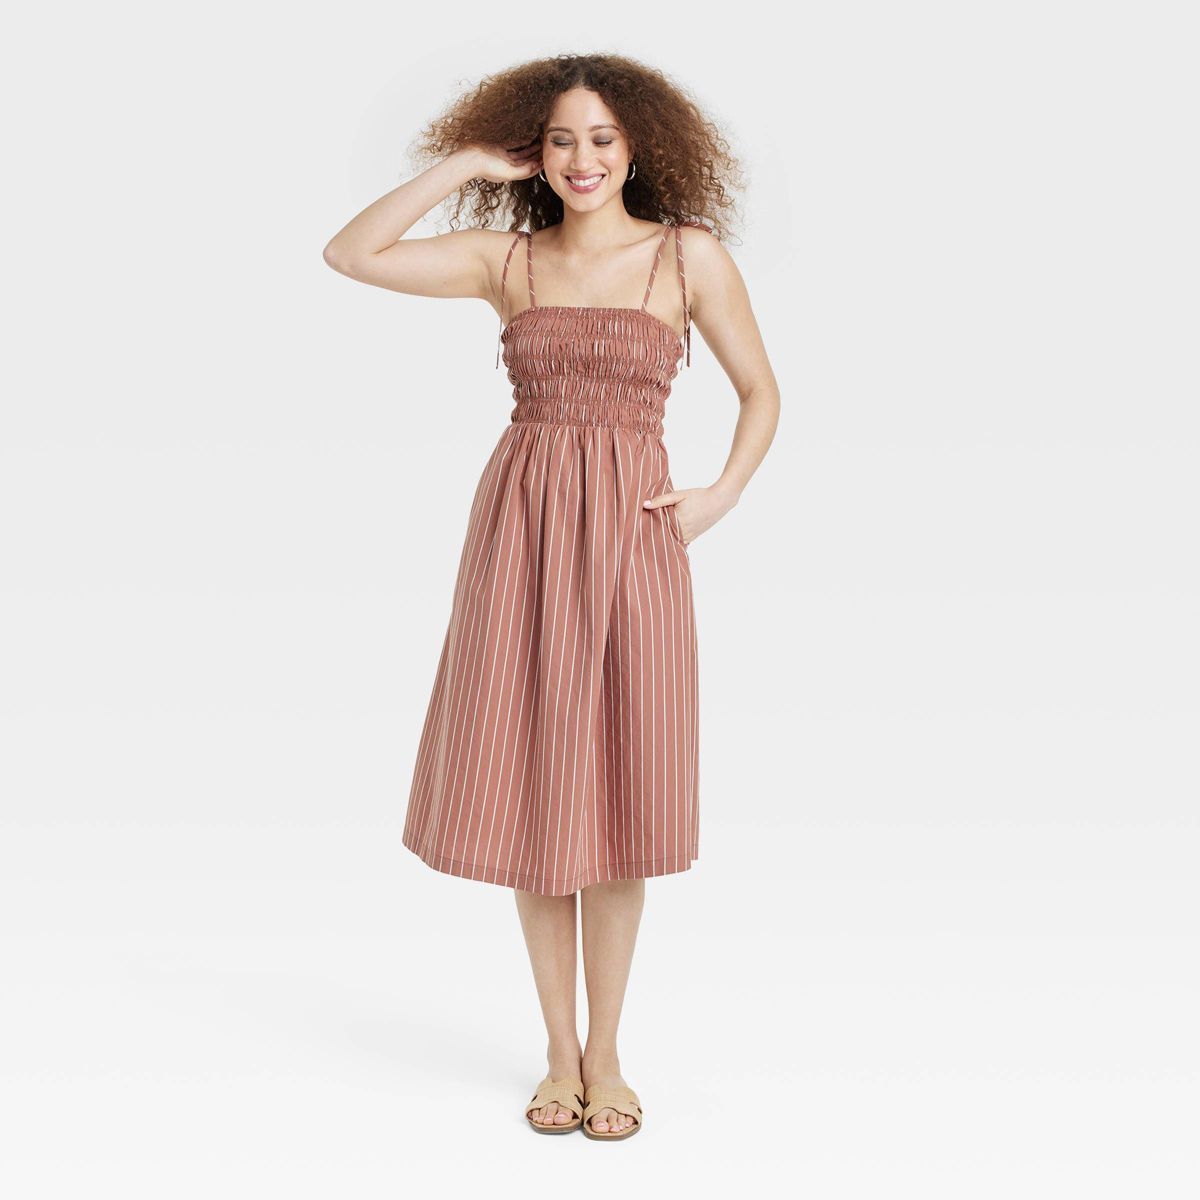 Women's Midi Smocked Sundress - A New Day™ Pink Striped S | Target